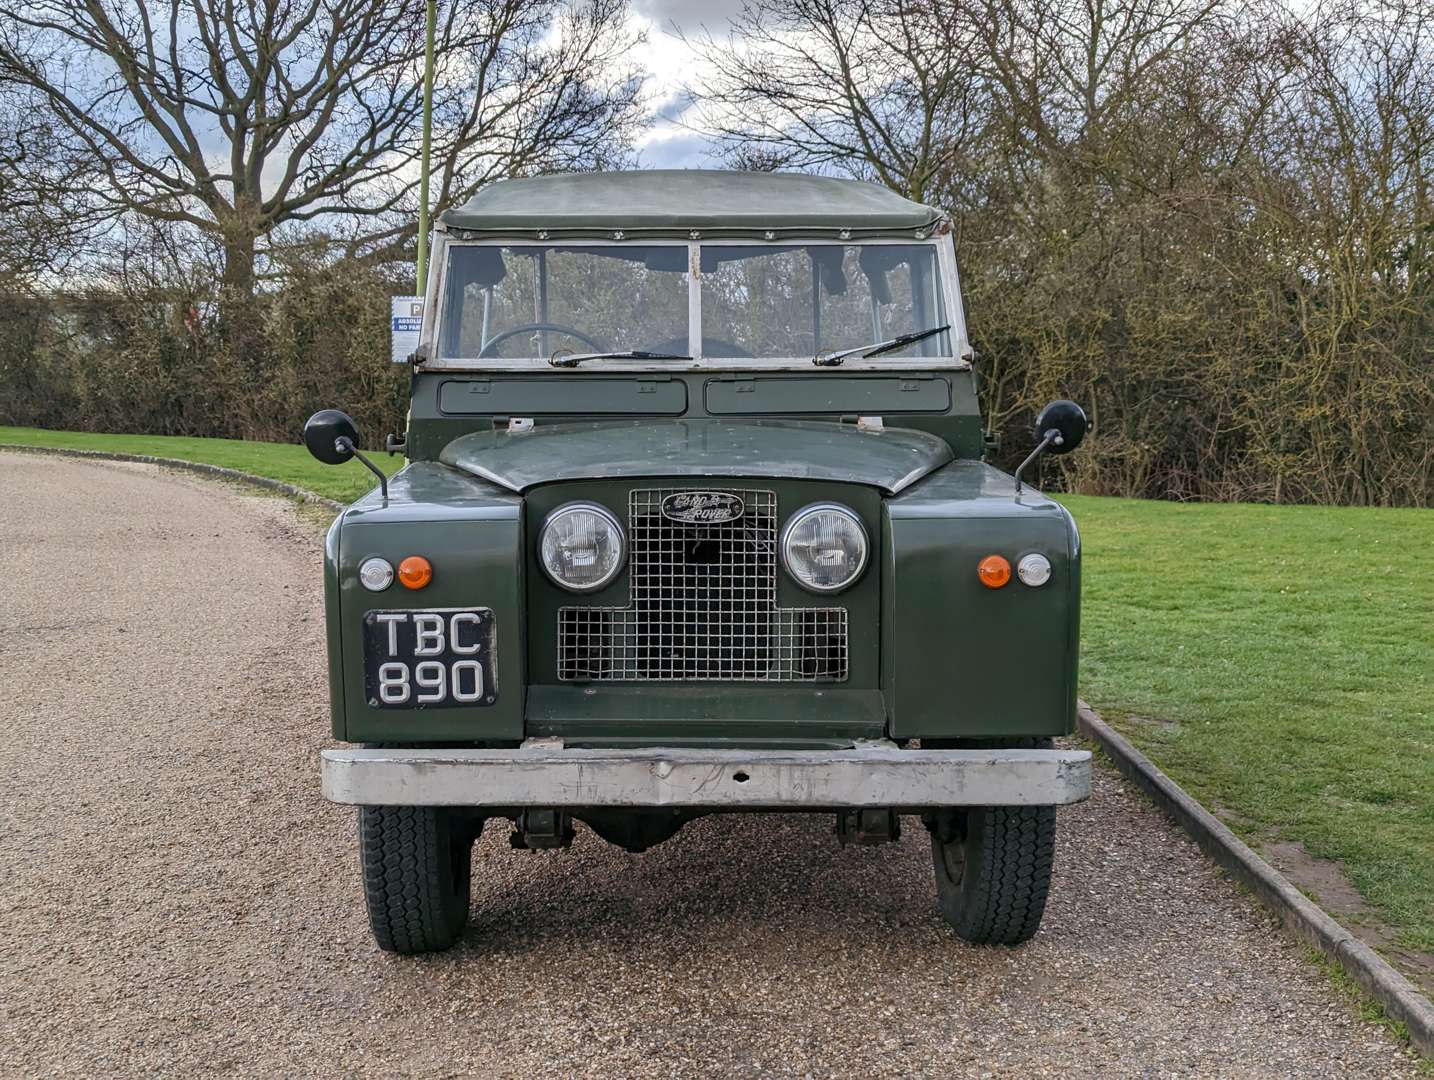 1958 LAND ROVER SWB SERIES II - Image 2 of 26